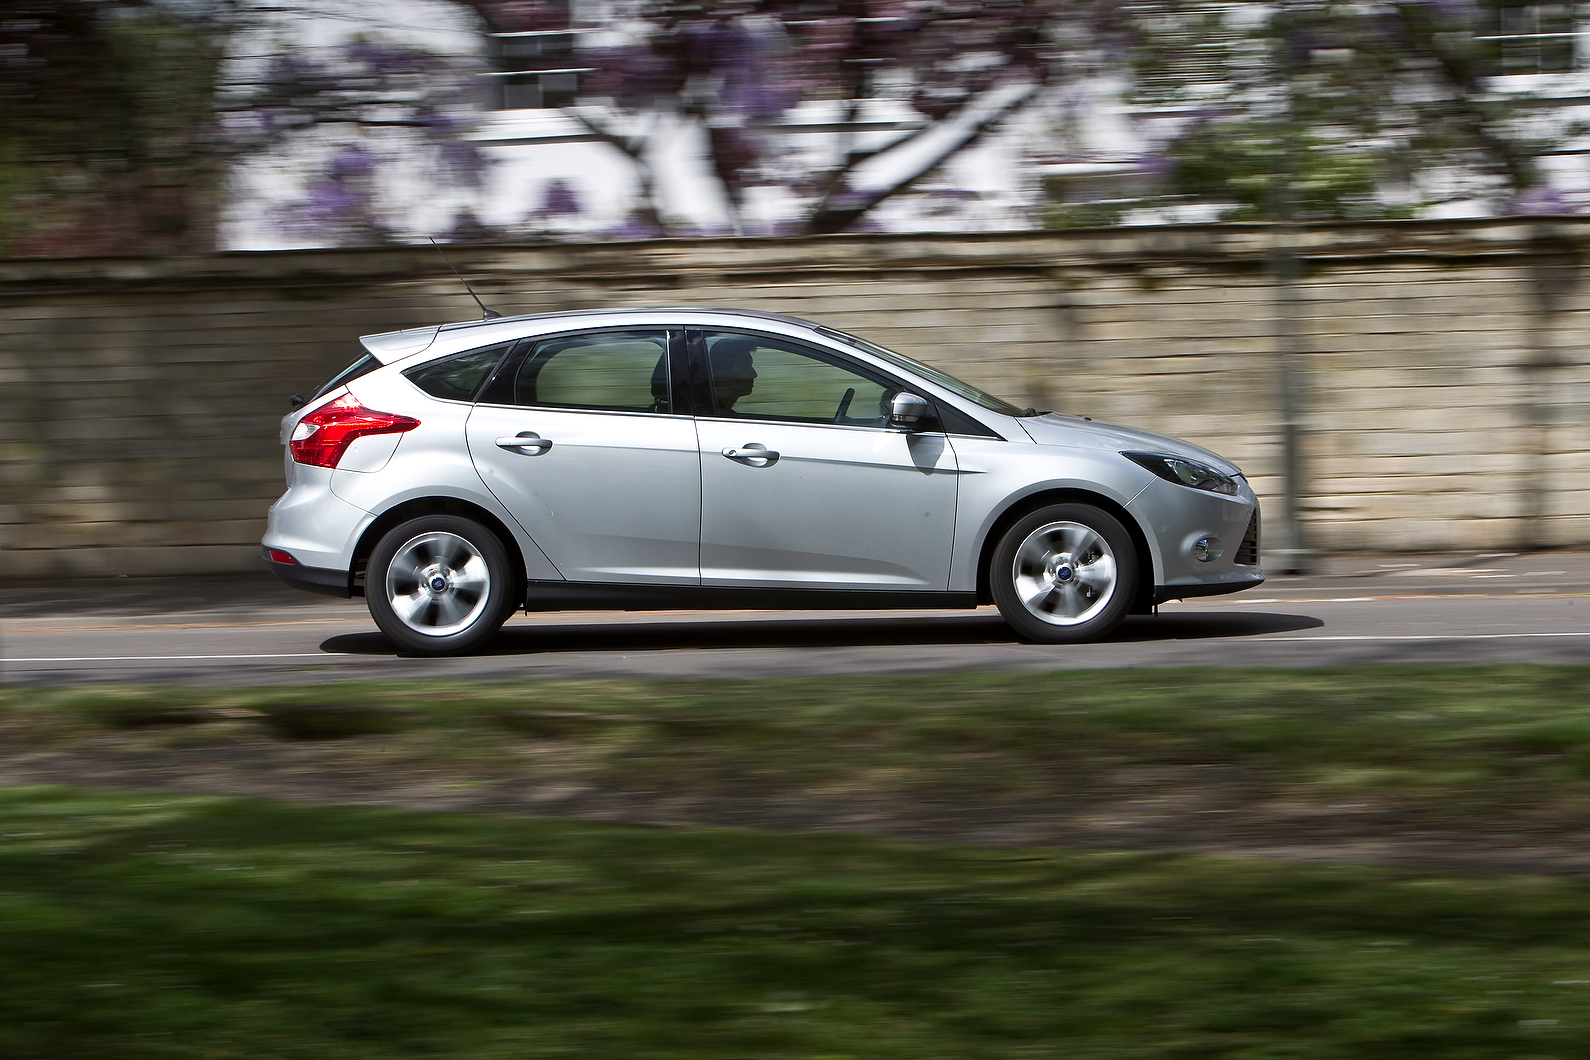 Ford focus 1.6 tdci review #7